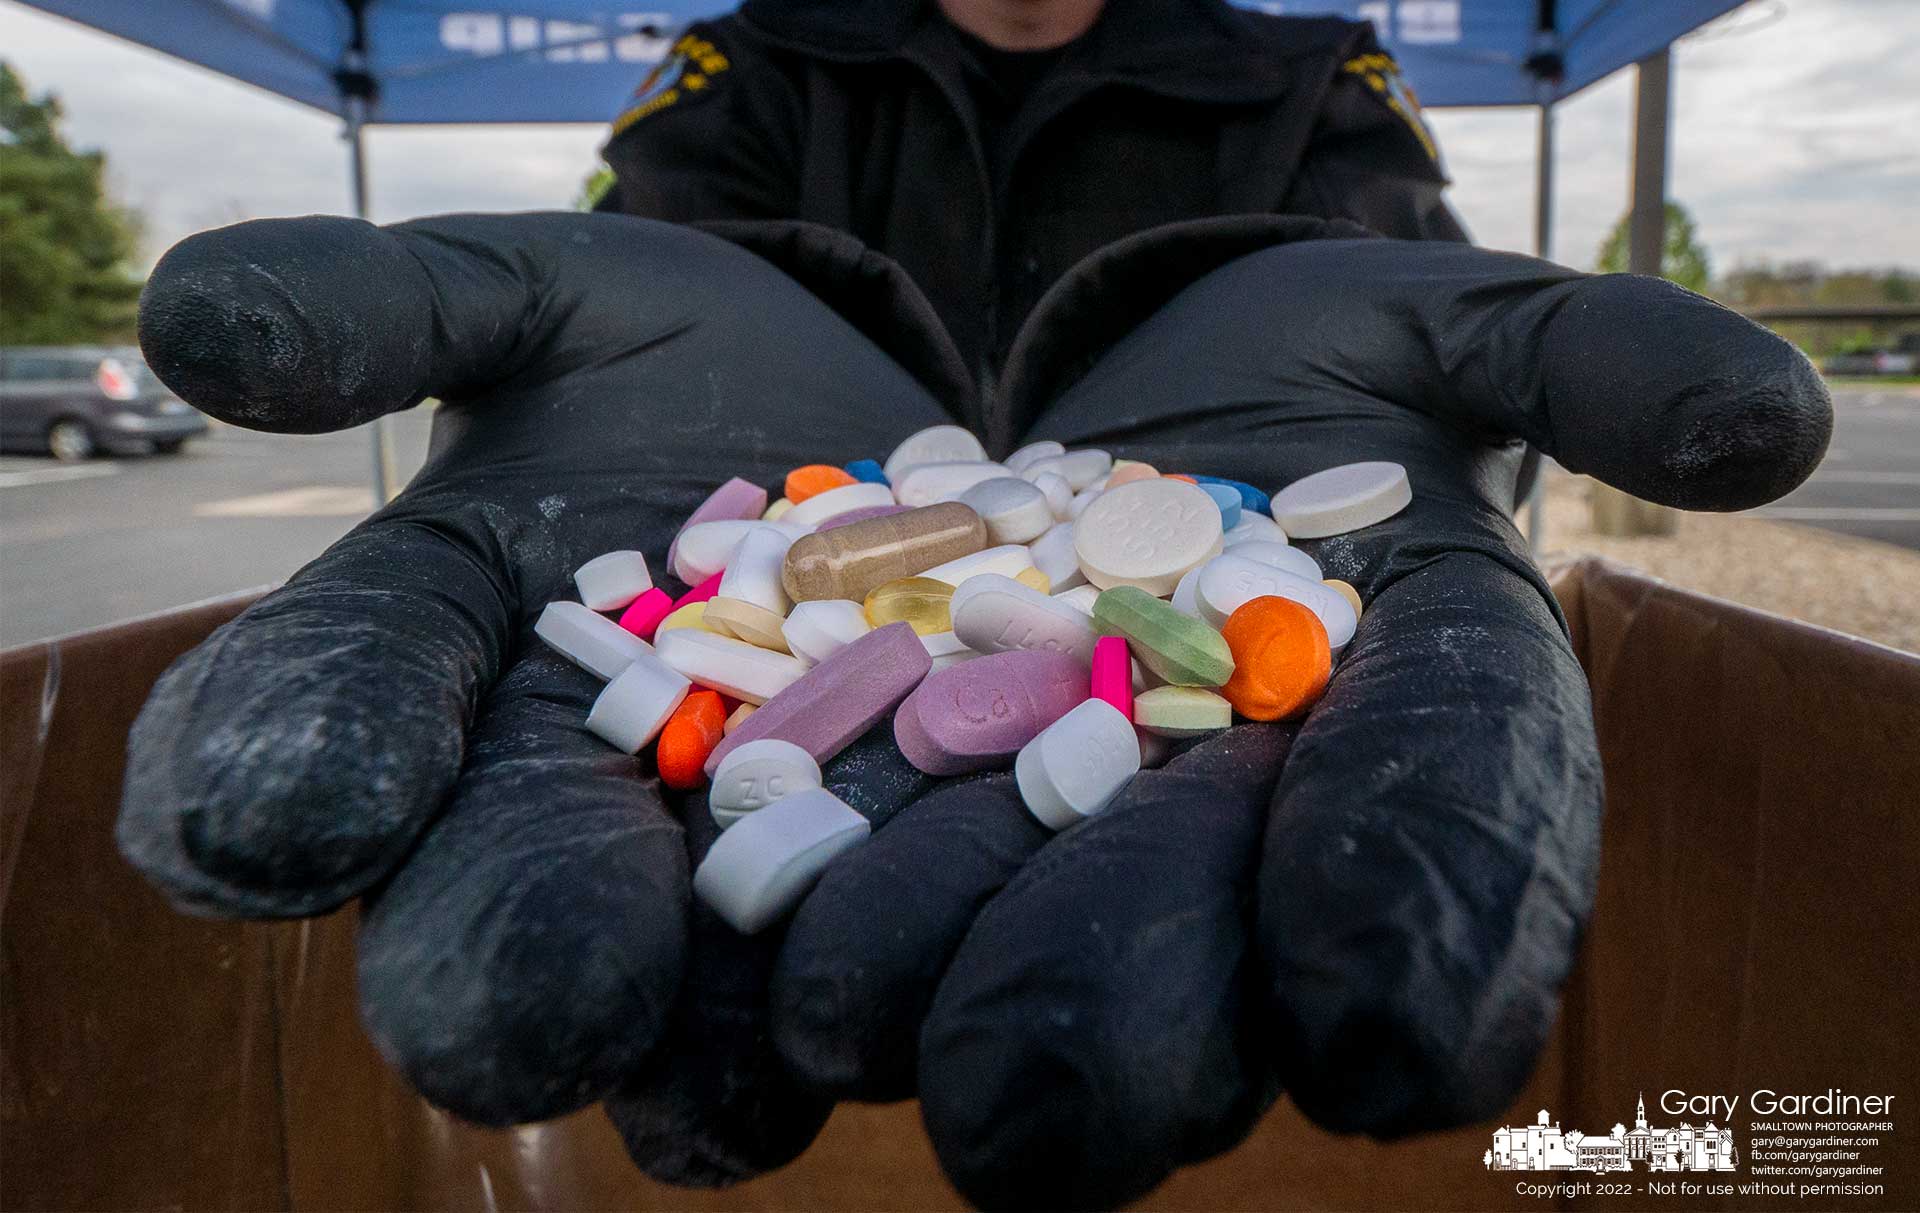 A Blendon Township officer shows a very small portion of the drugs recovered during Saturday's Drug Take Back Day where police agencies collected unused and not needed drugs for disposal. My Final Photo for April 30, 2022.